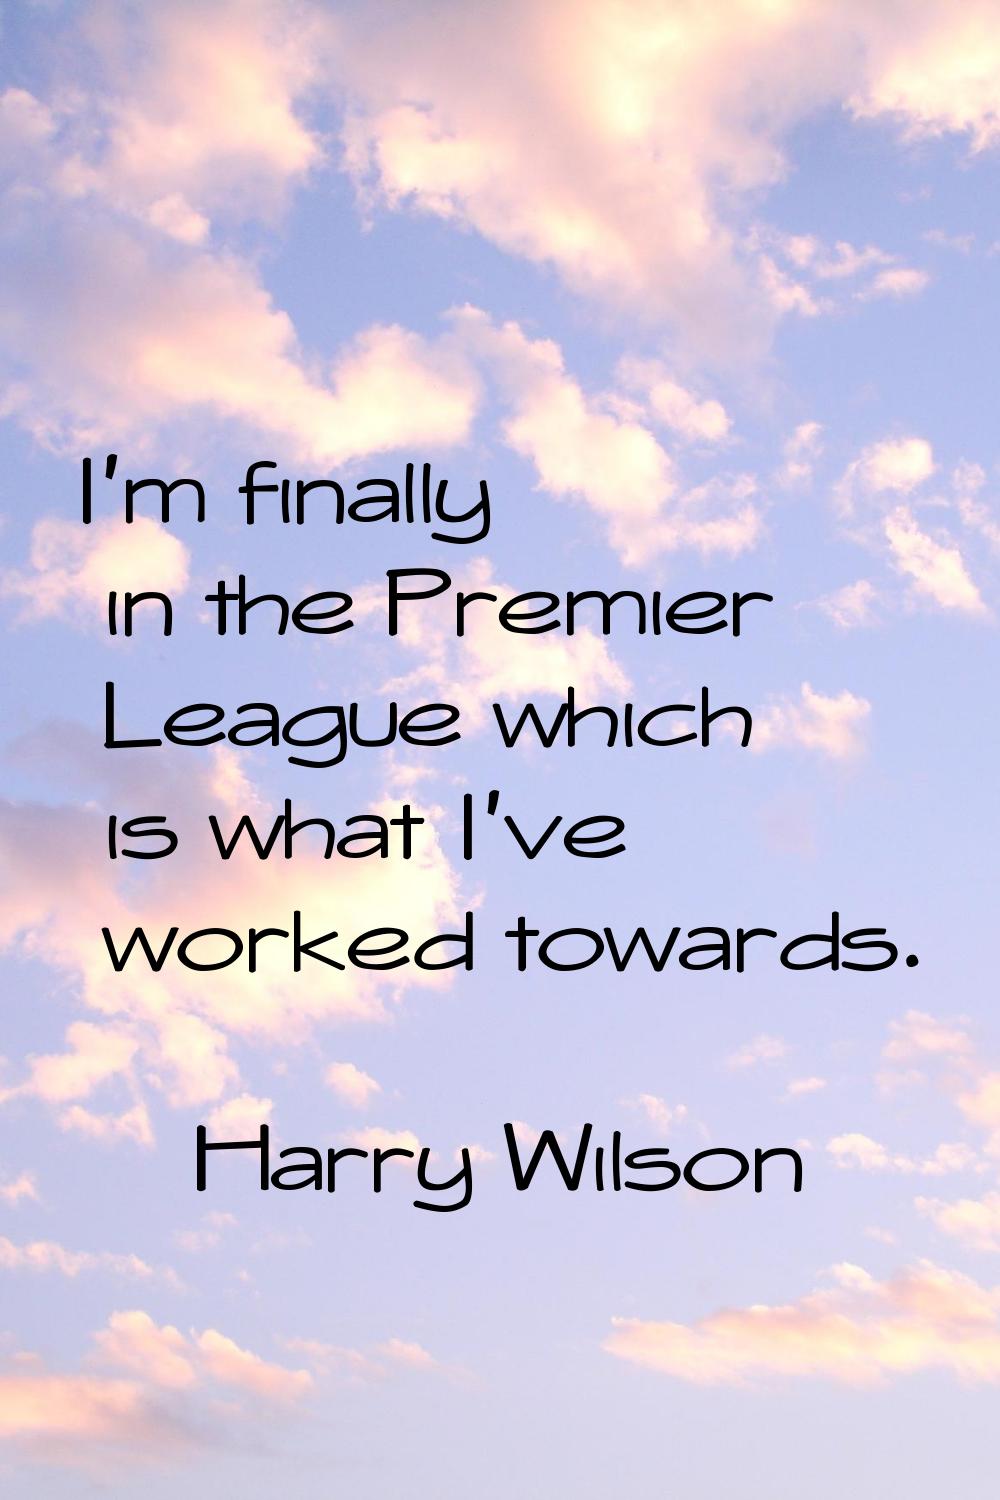 I'm finally in the Premier League which is what I've worked towards.